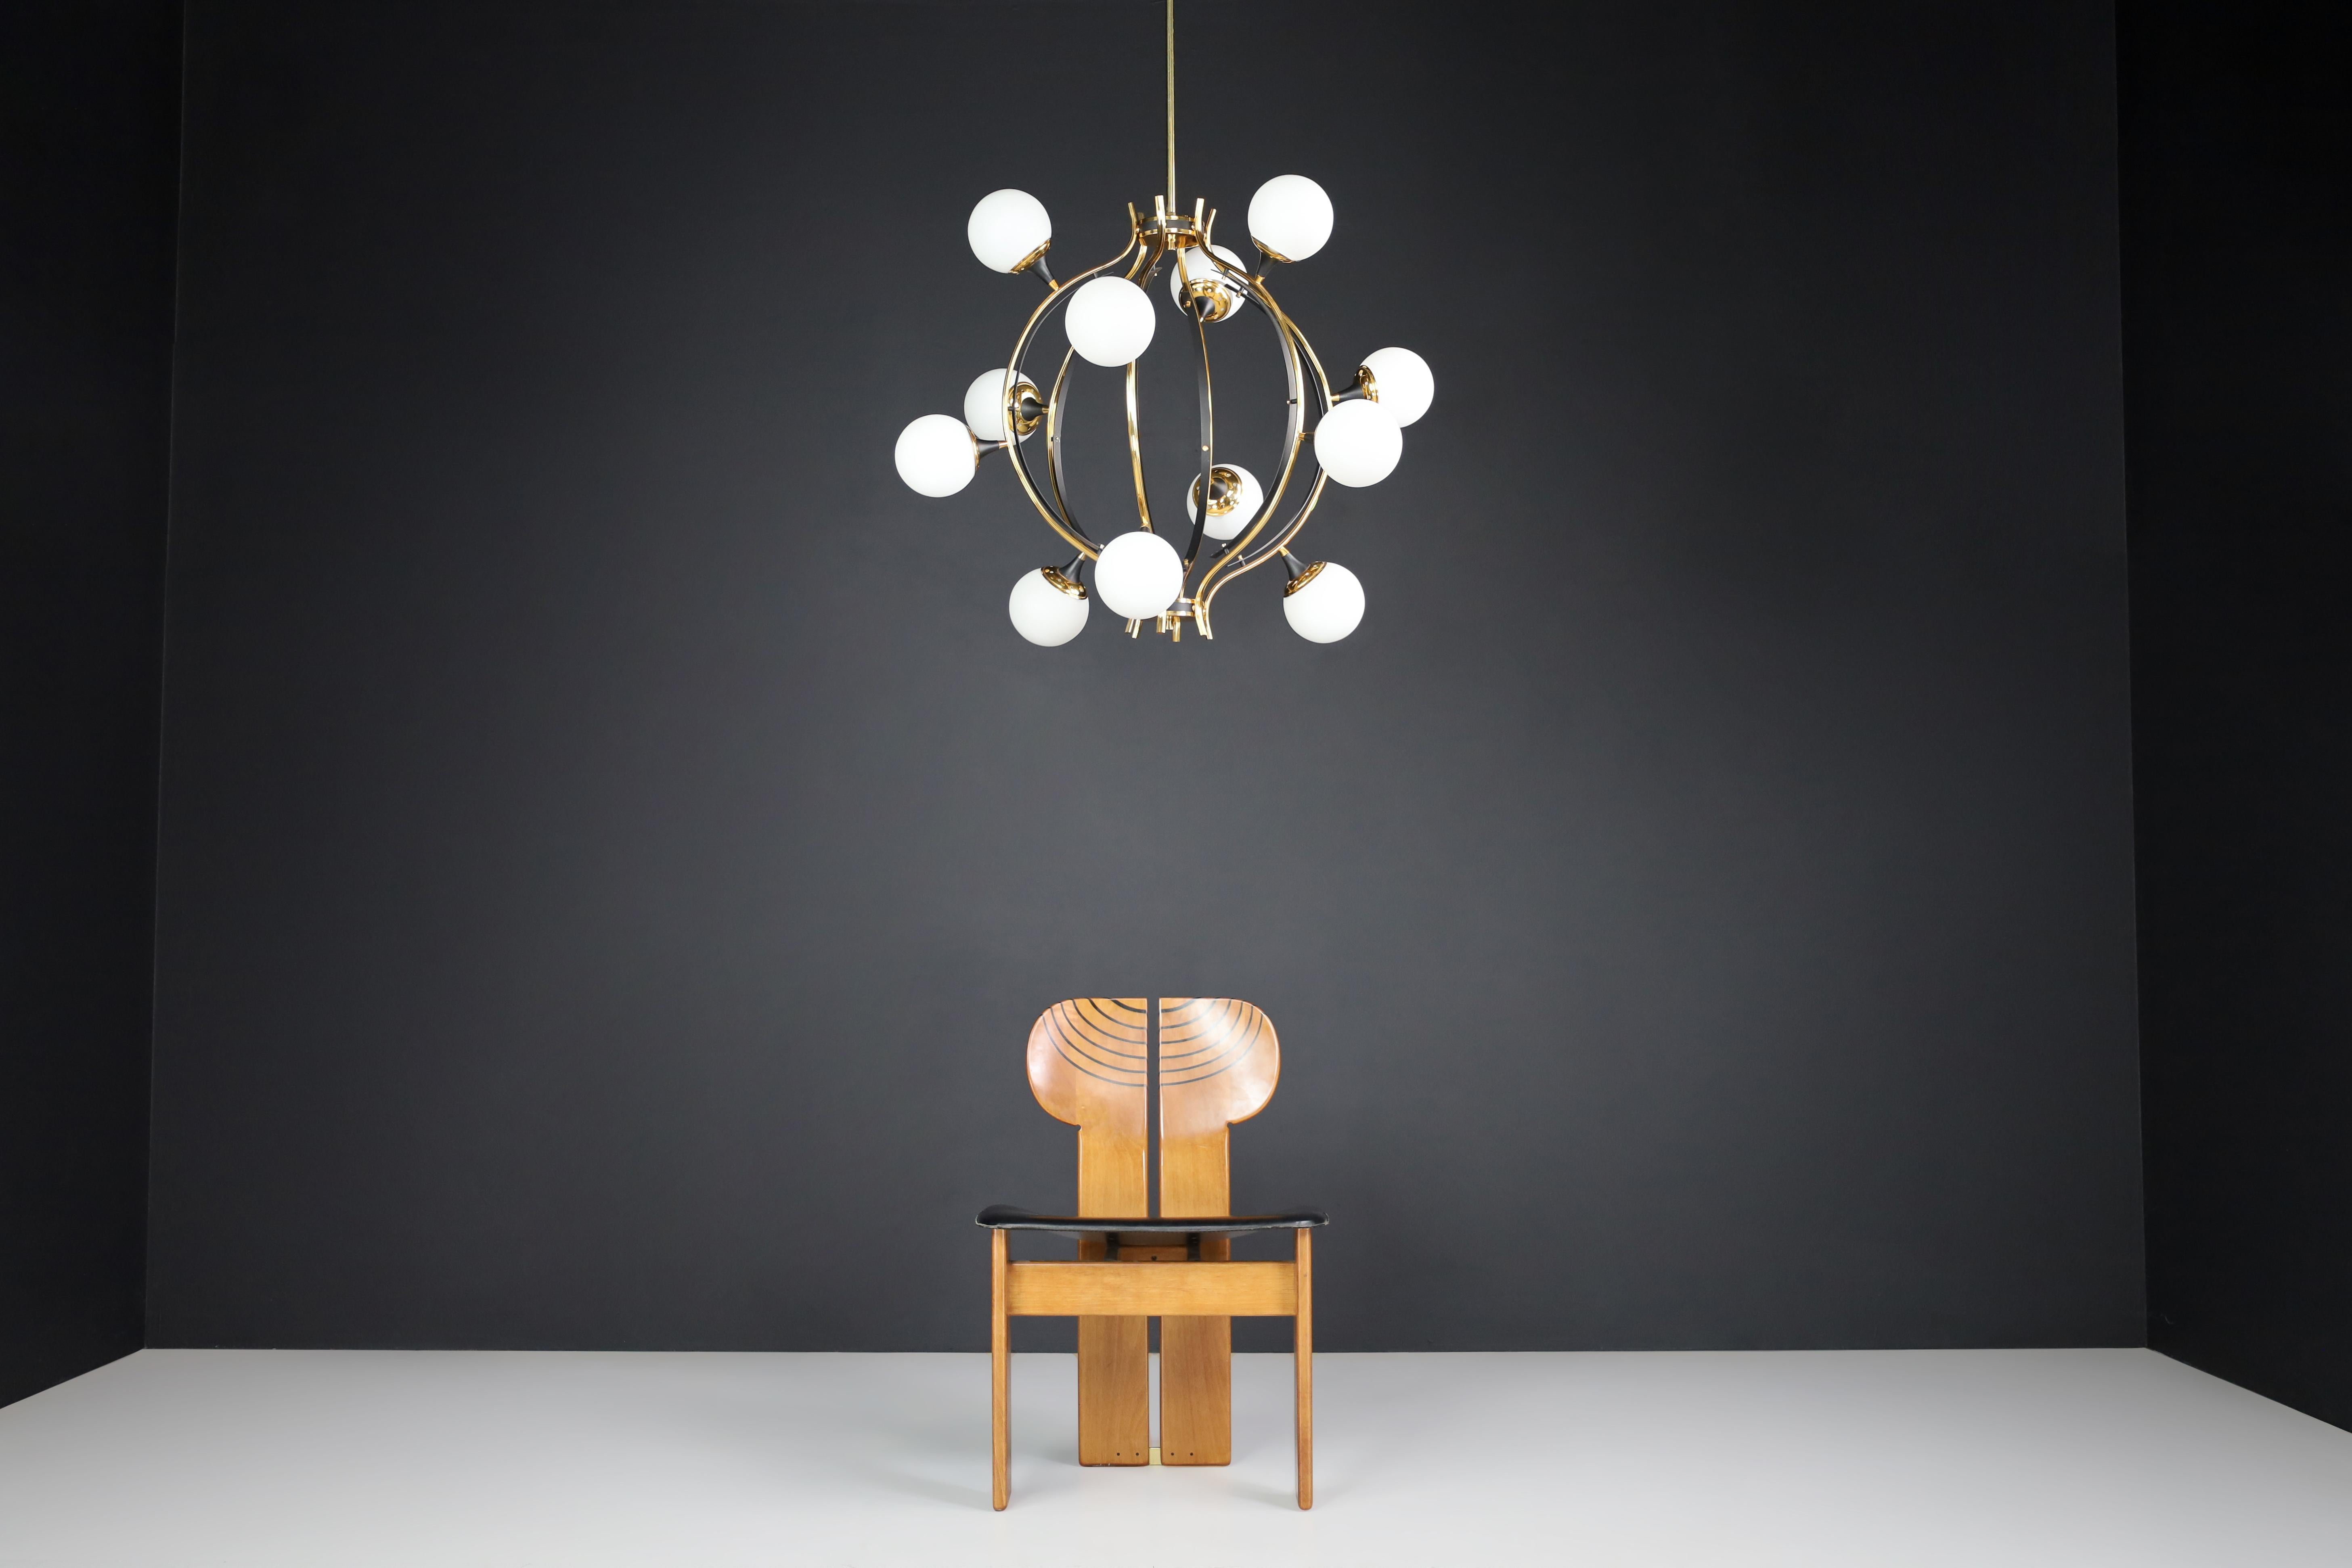 Metal Midcentury Stilnovo Chandelier in Brass and 12 Opaline Globes, Italy 1950s For Sale